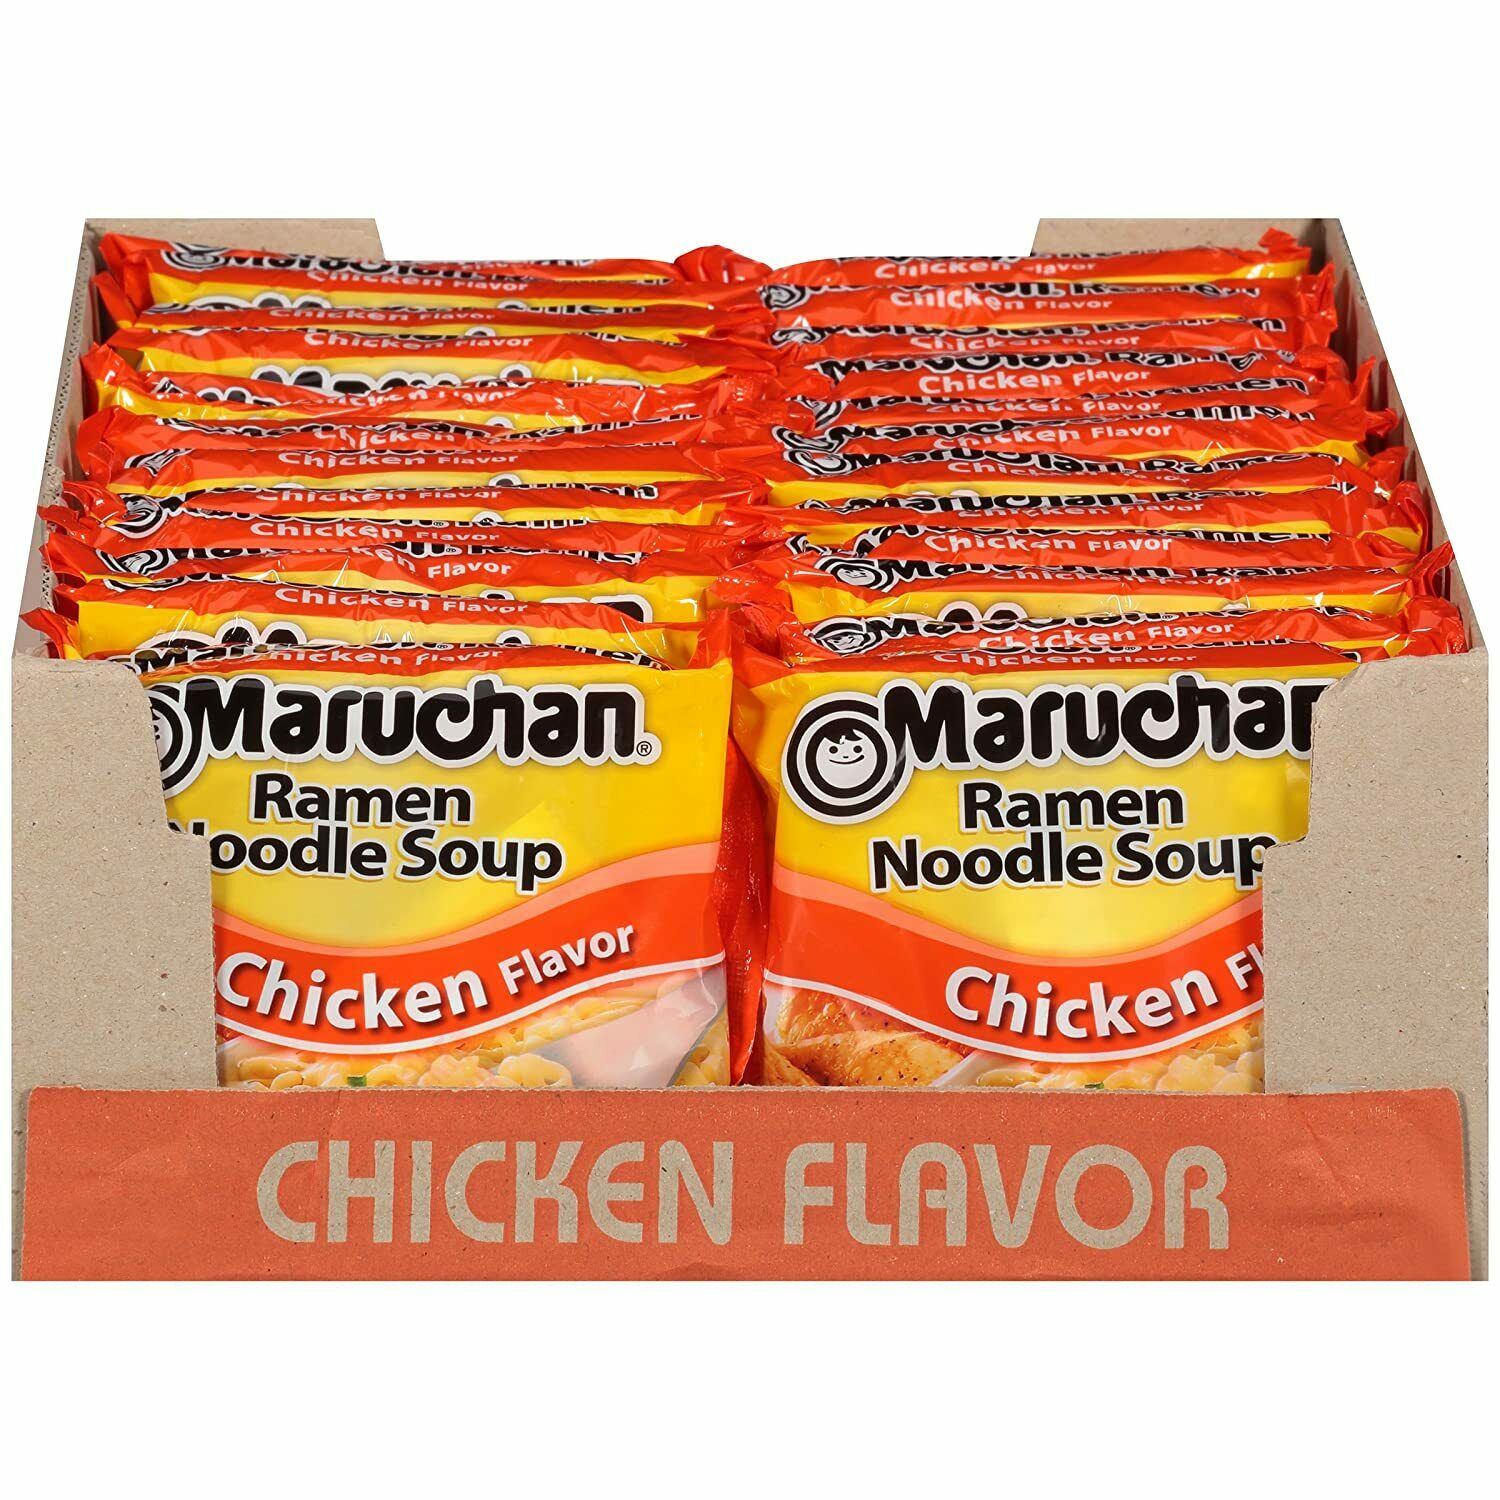 Maruchan Instant Lunch Ramen Noodles Soup Cup Chicken Flavor 2.25 Oz Pack of 12